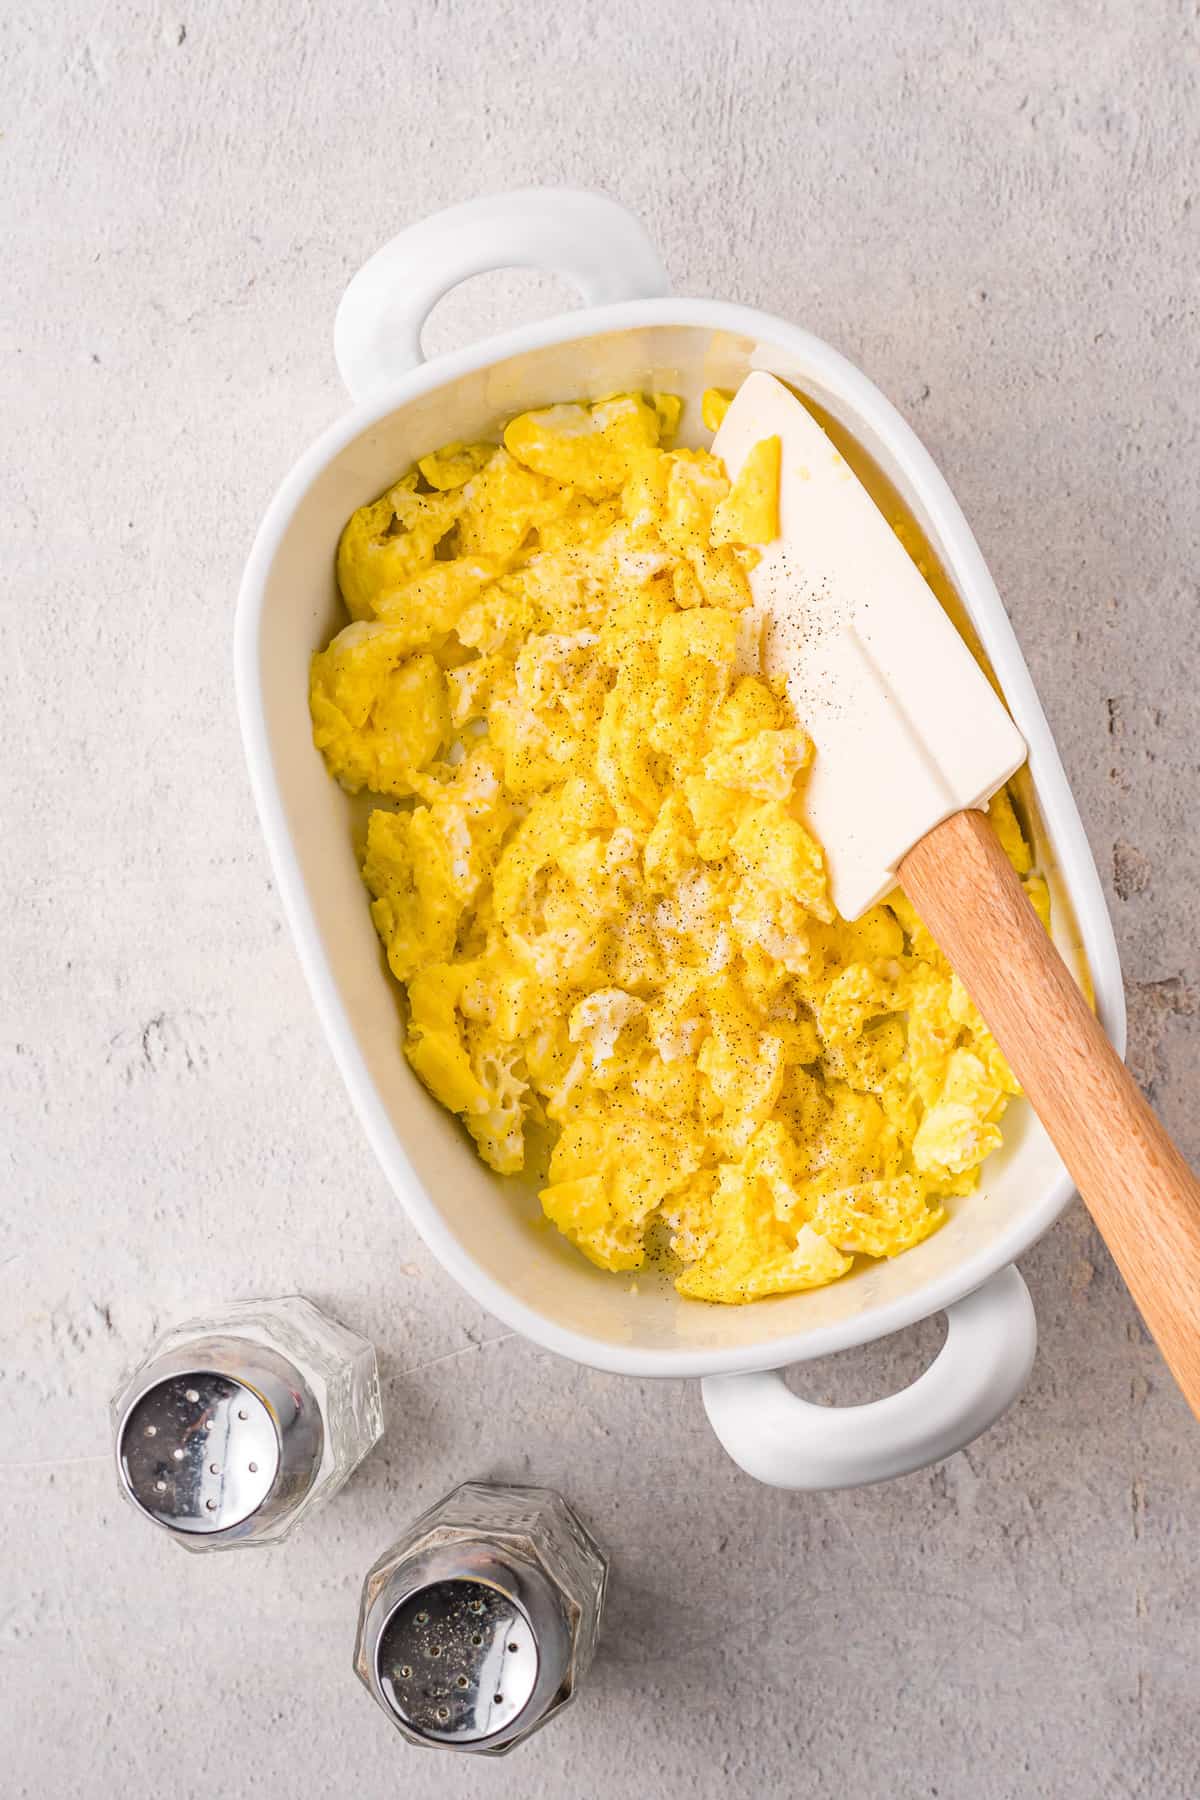 Microwave scrambled eggs in a baking dish.